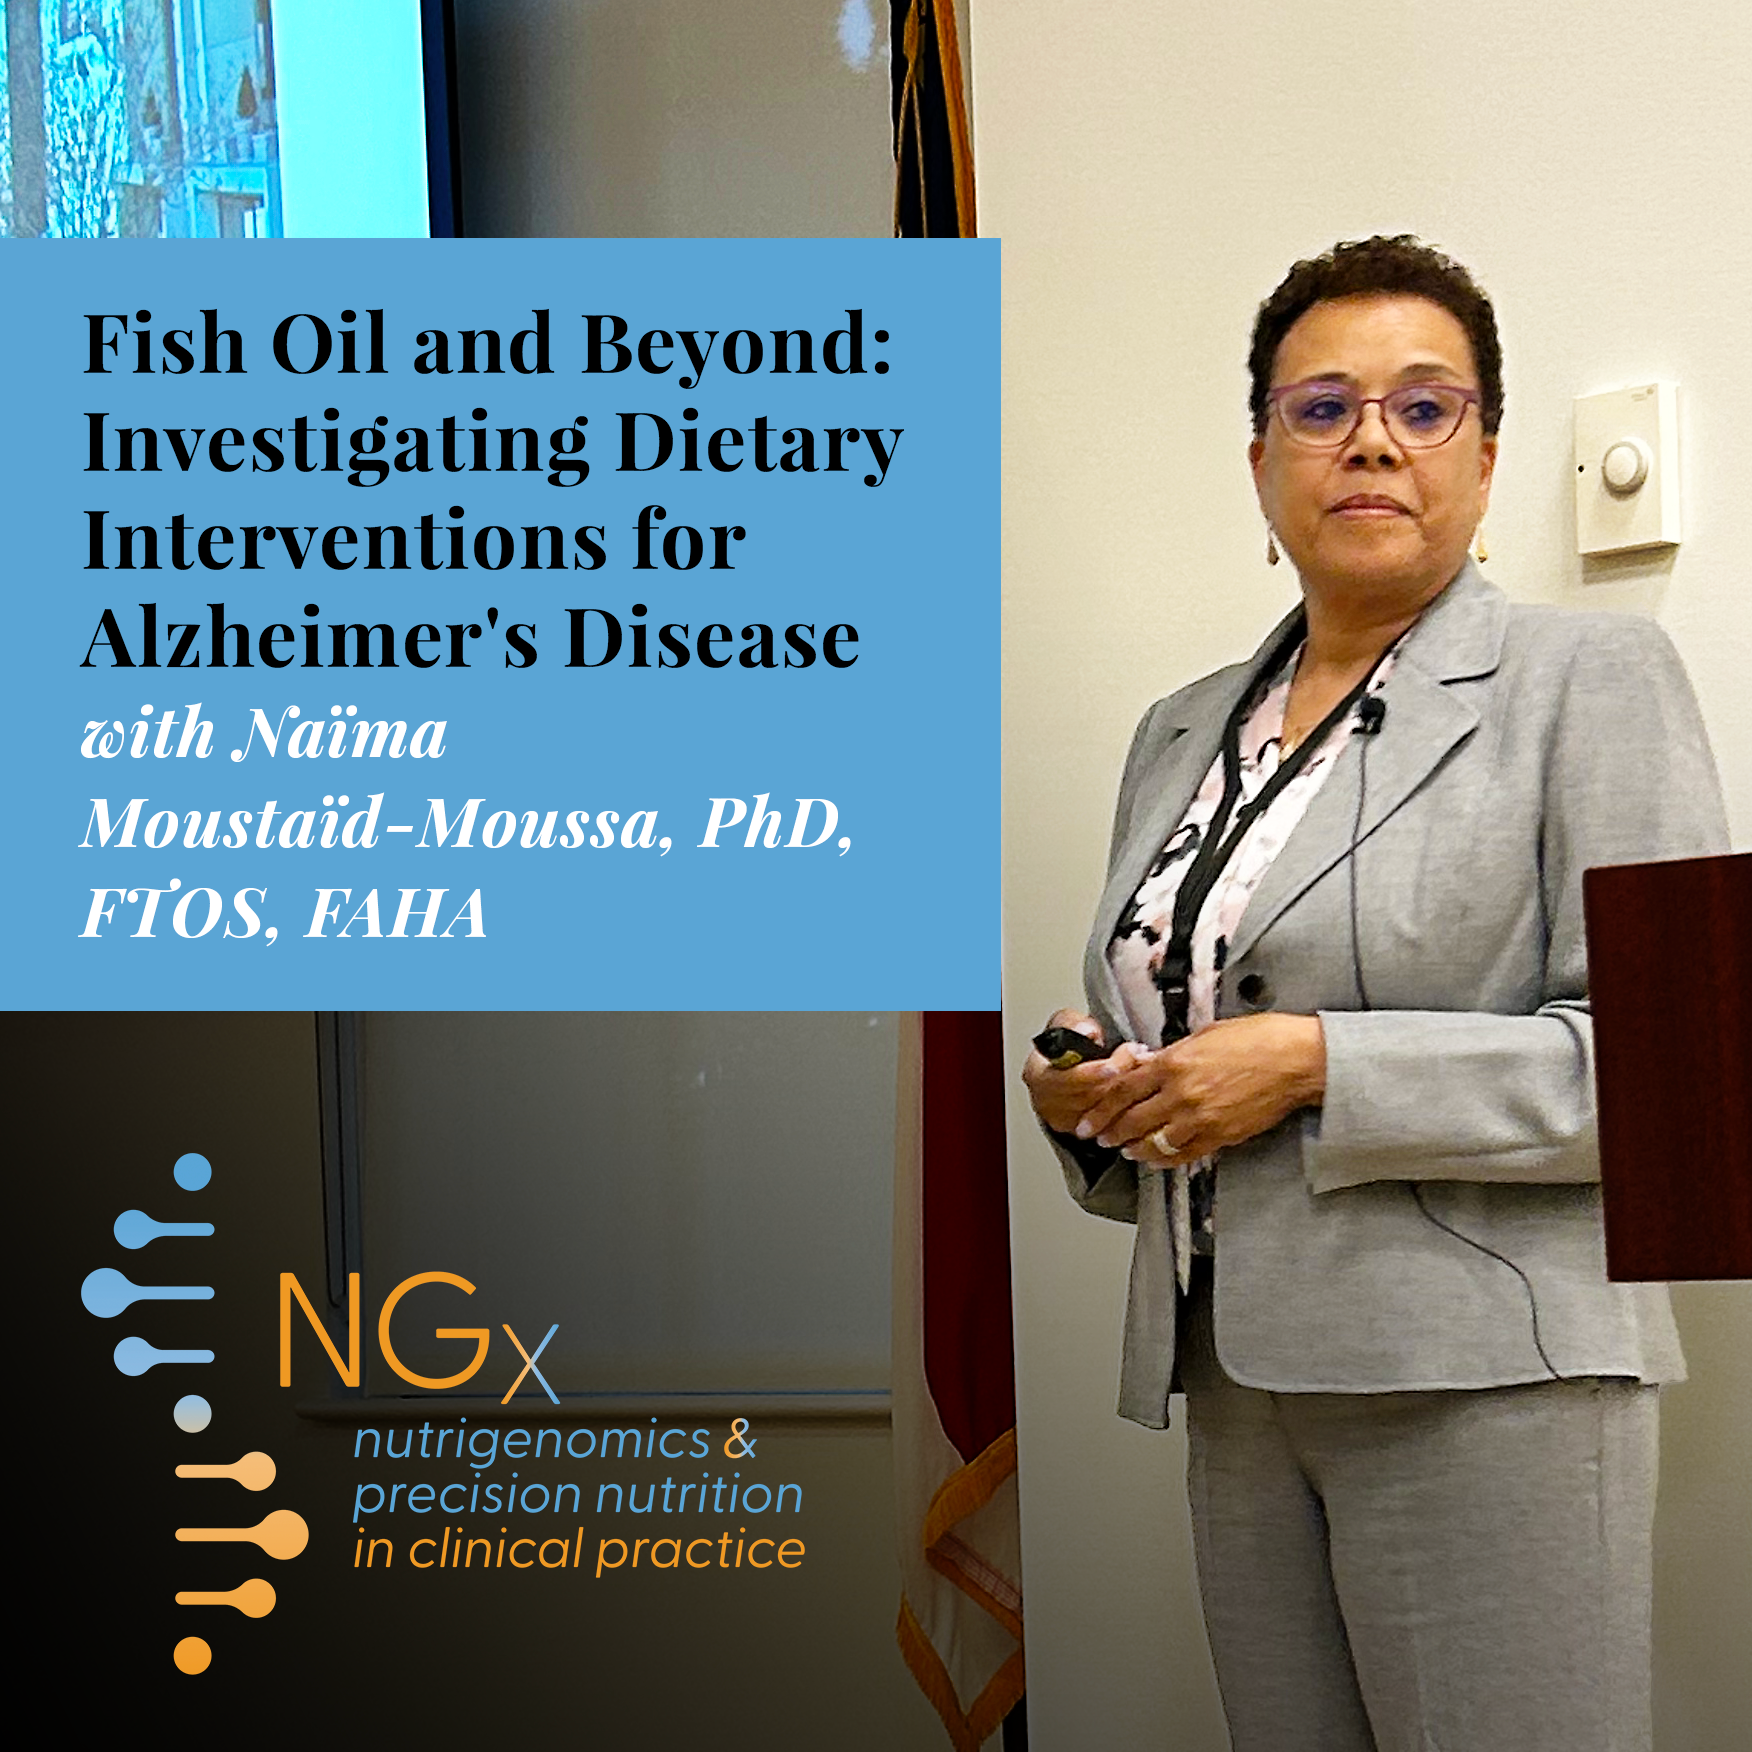 Fish Oil and Beyond: Investigating Dietary Interventions for Alzheimer’s Disease with Dr. Naïma Moustaïd-Moussa